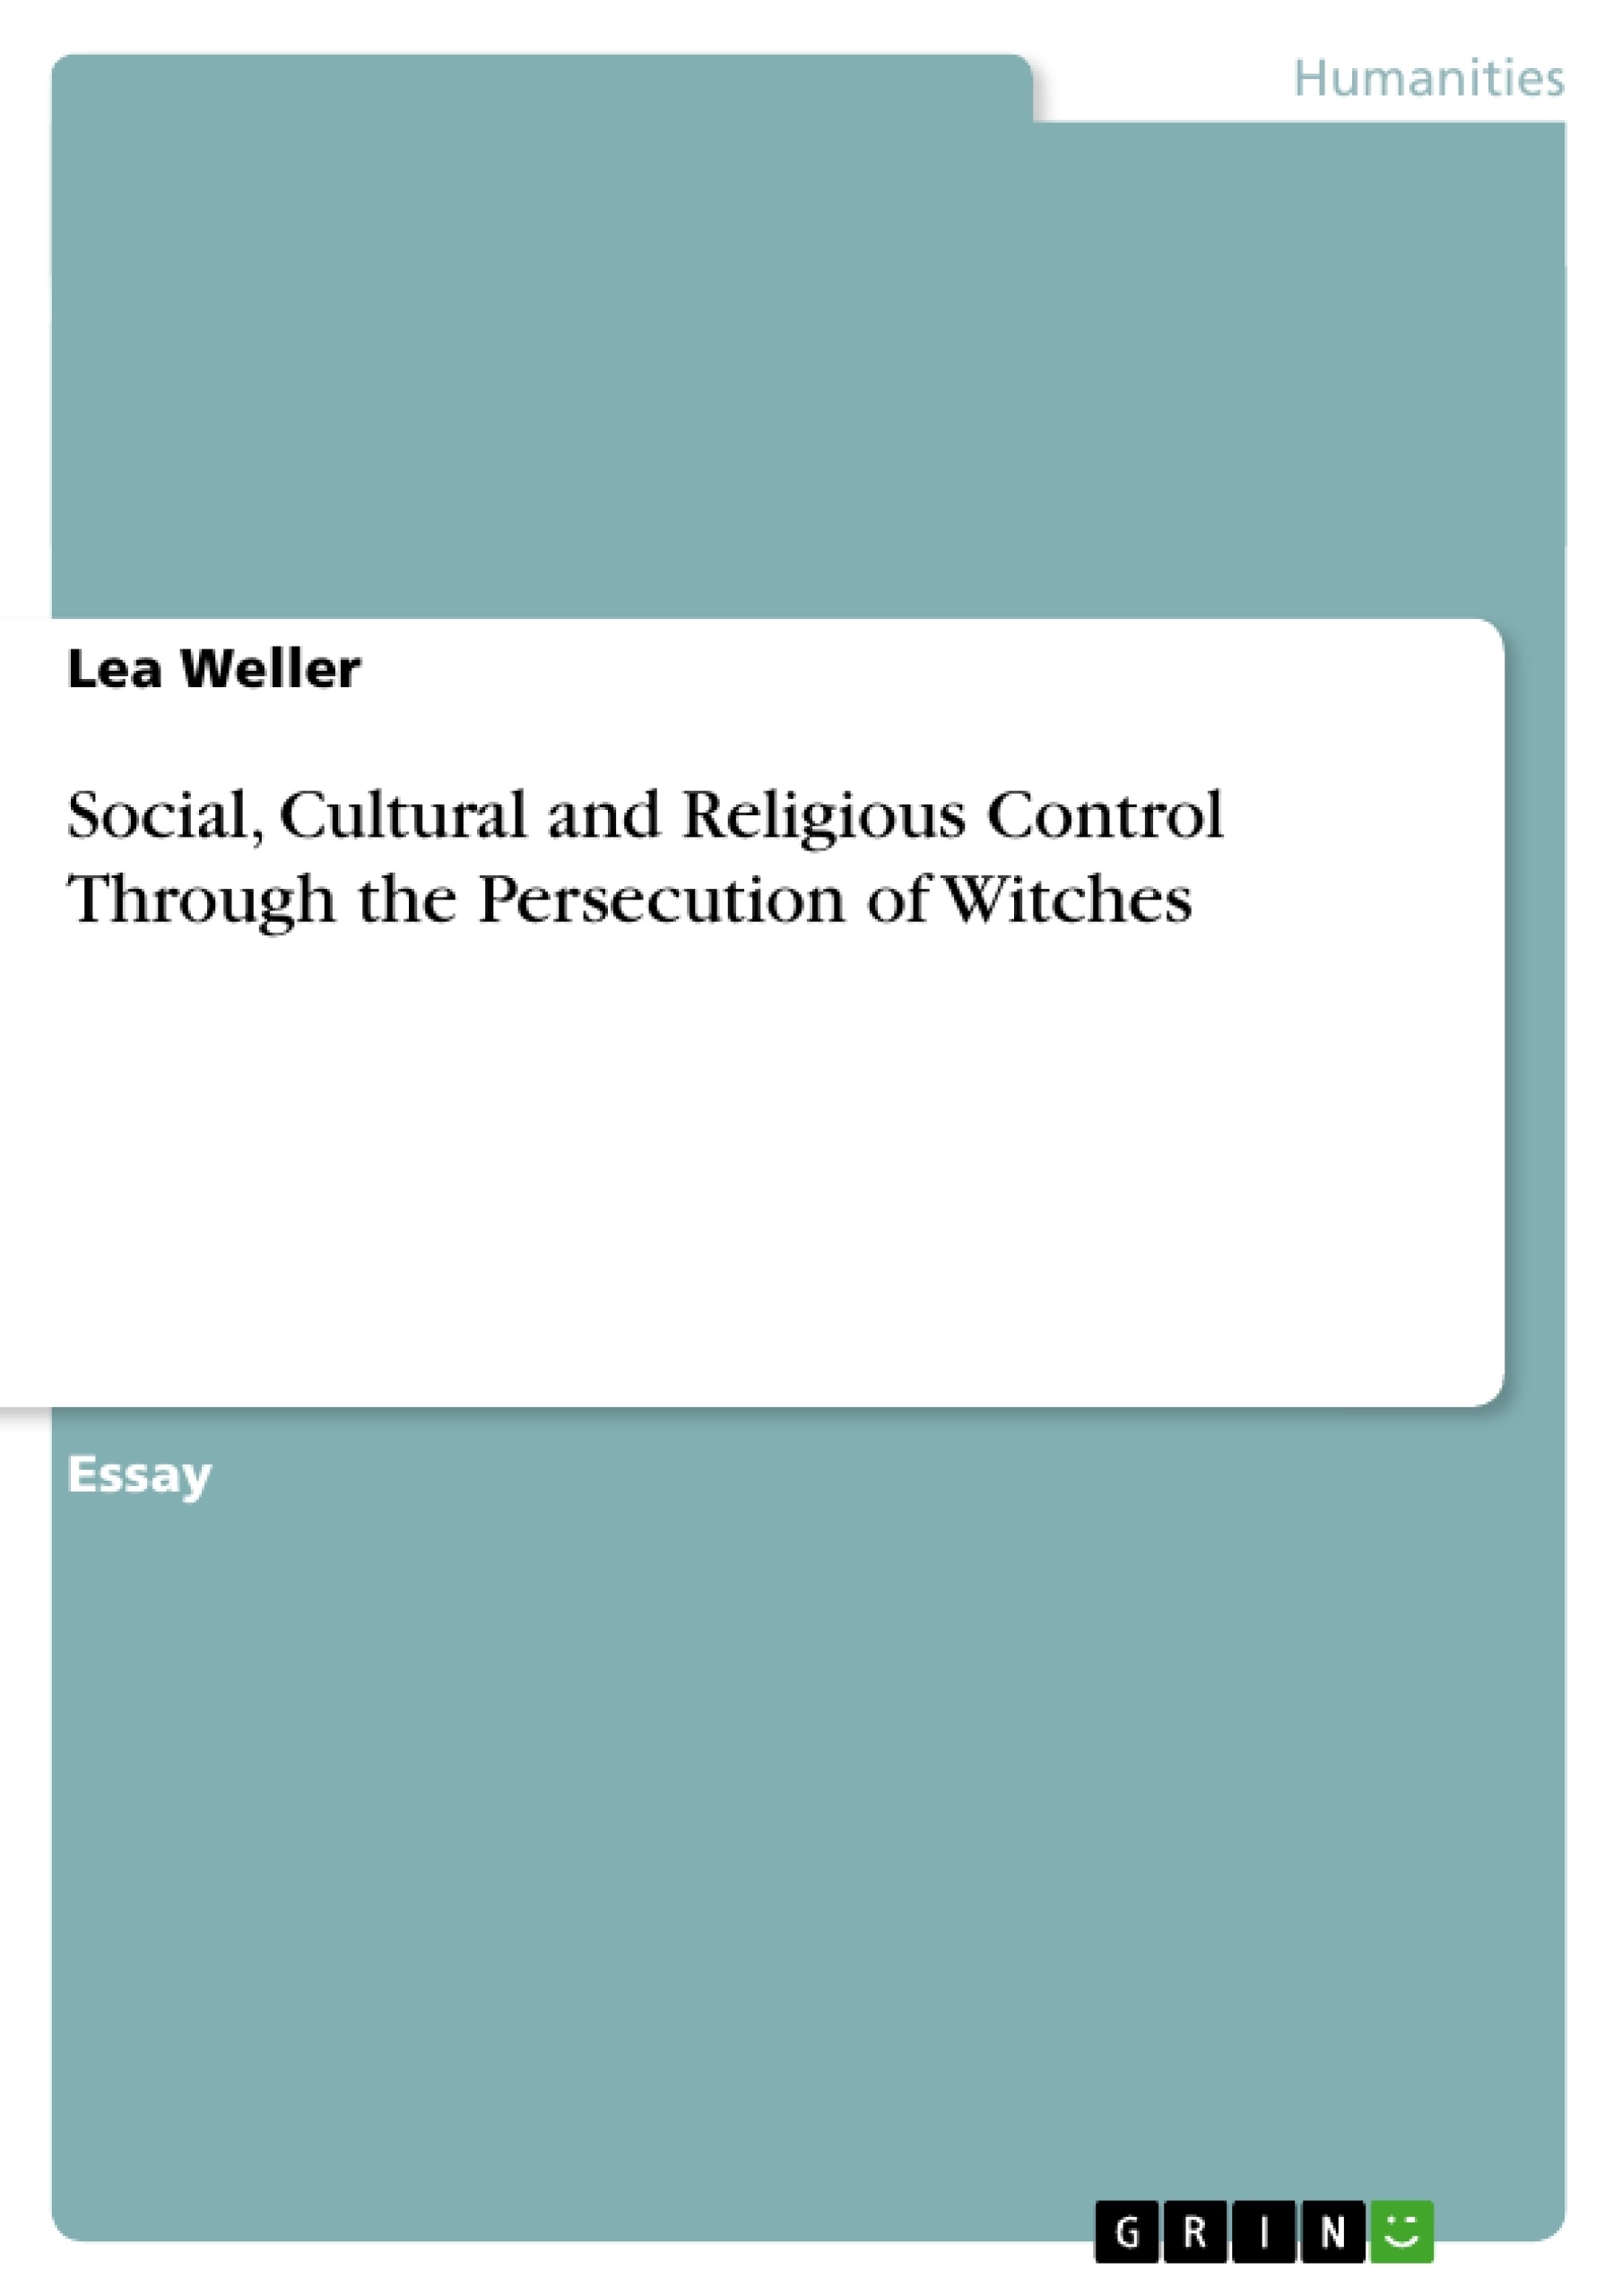 Título: Social, Cultural and Religious Control Through the Persecution of Witches